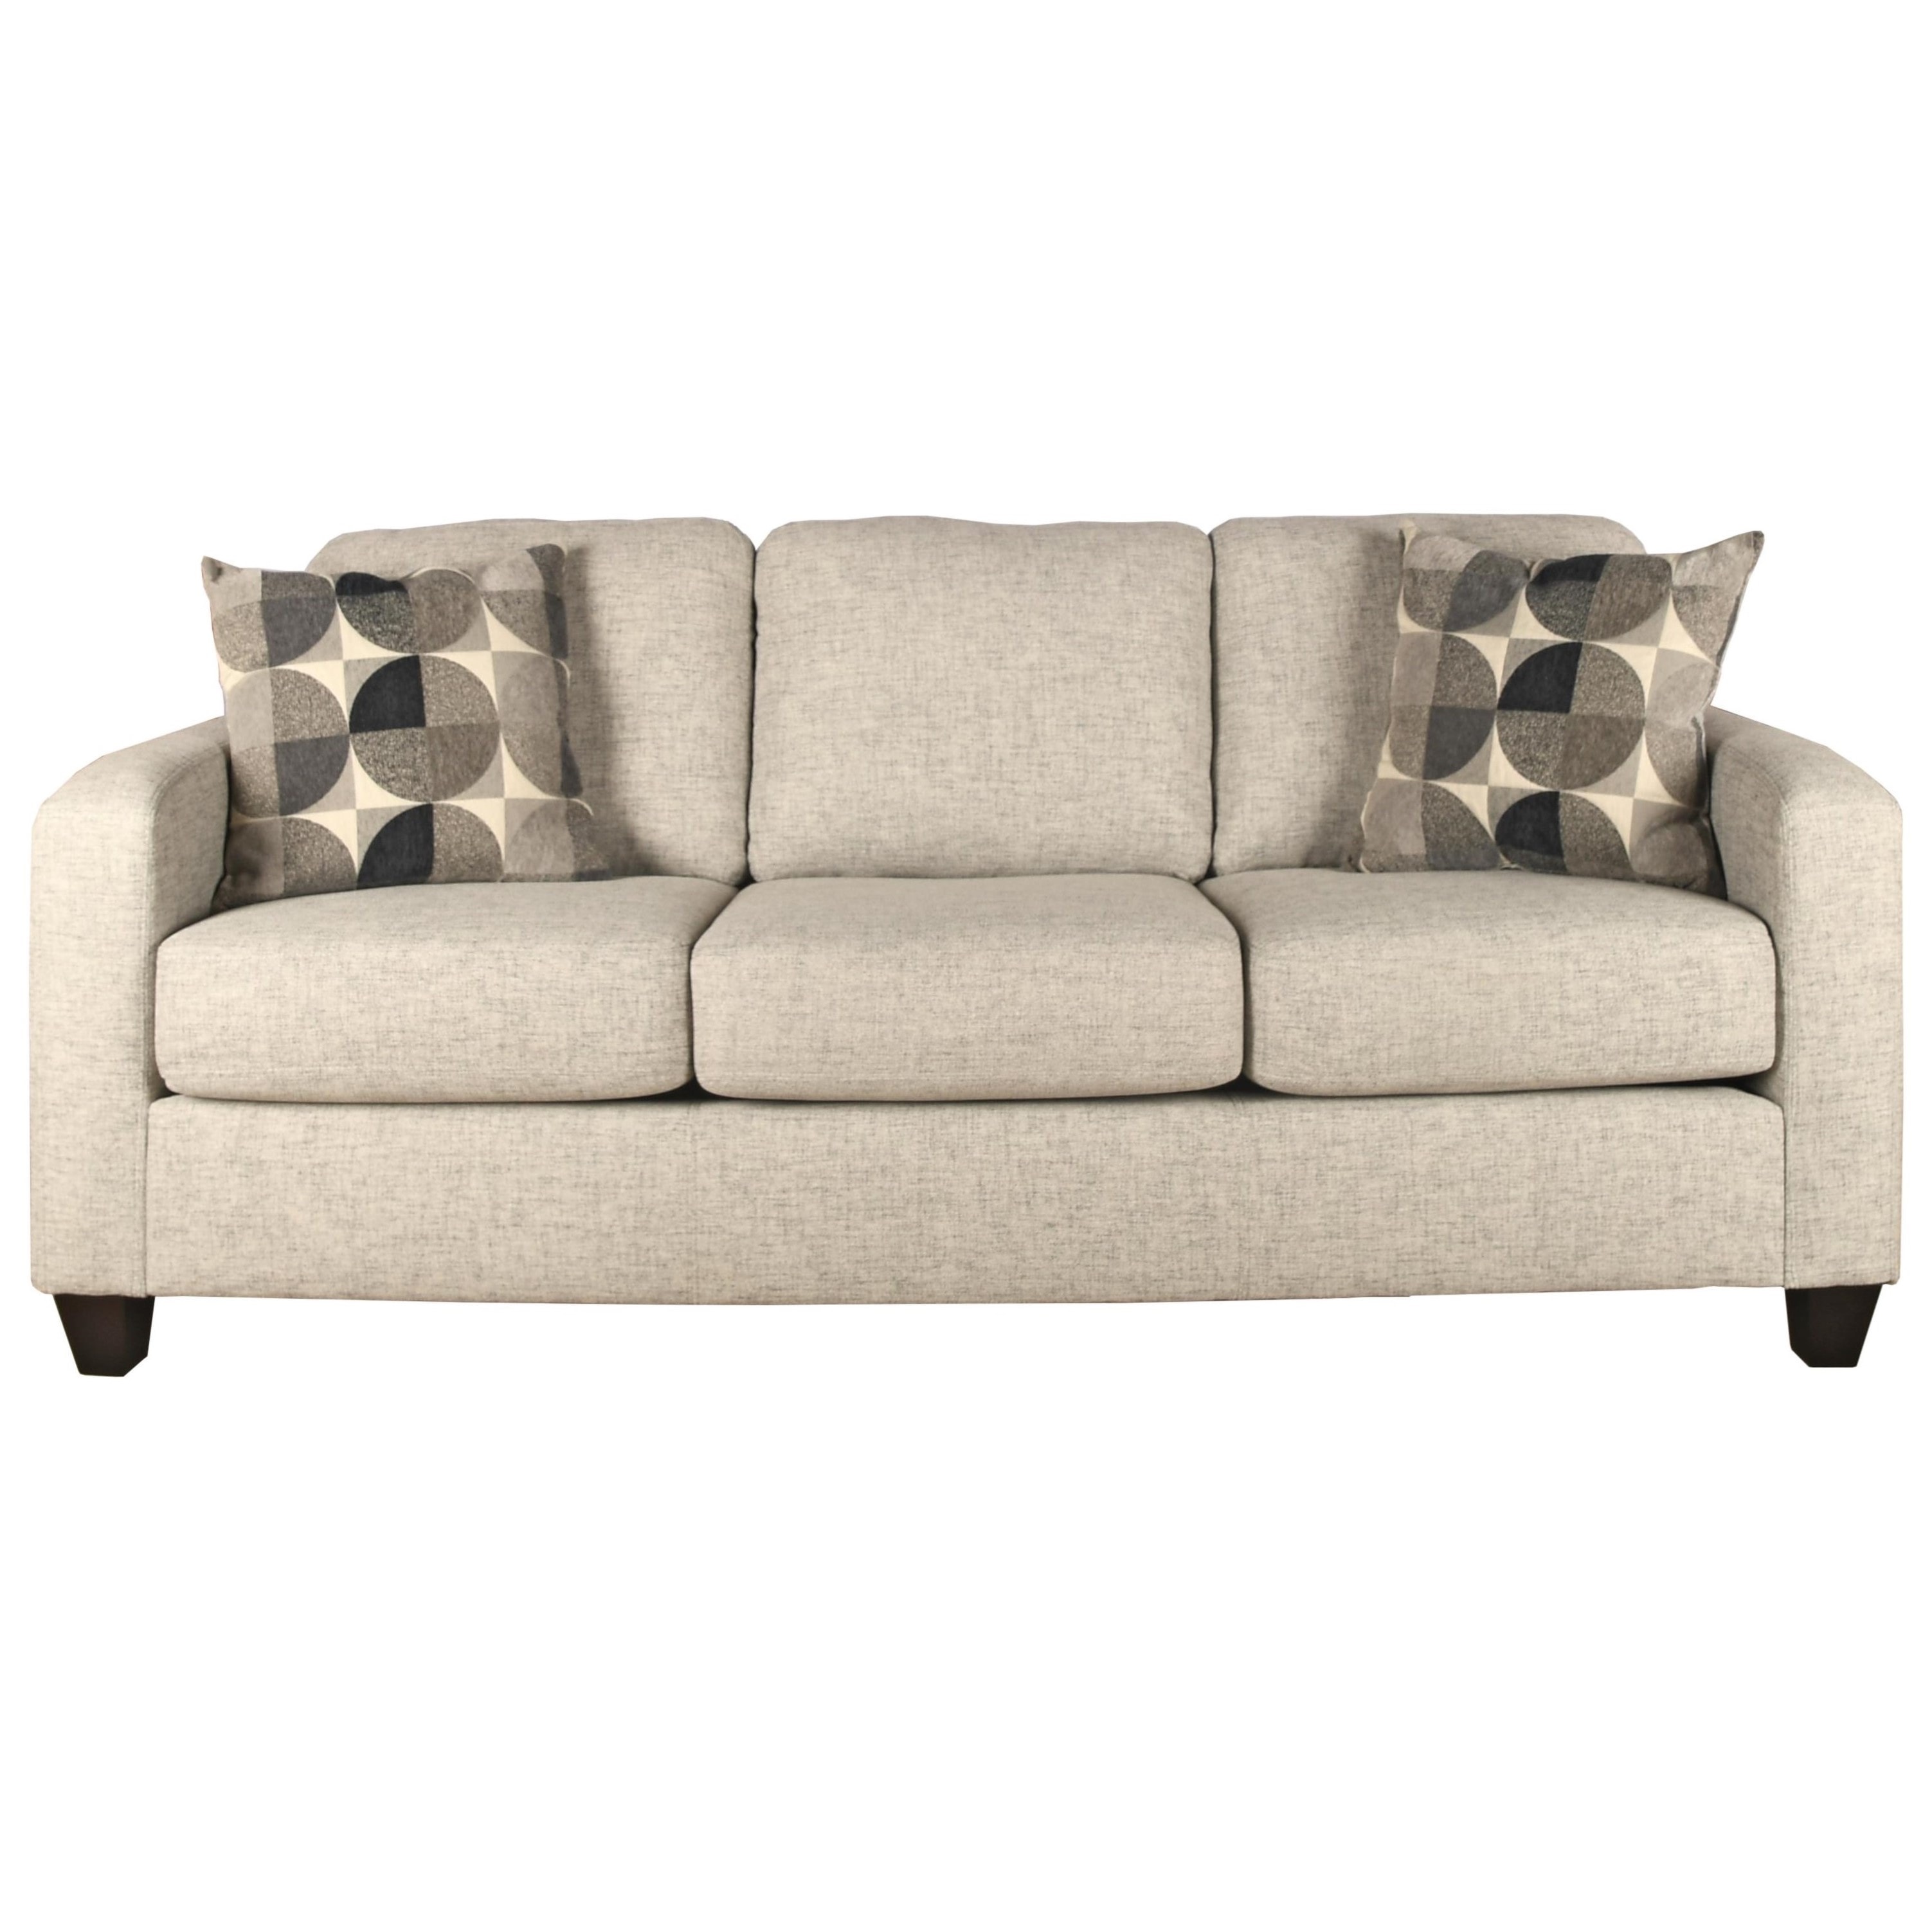 Shop Sofa from Option 2